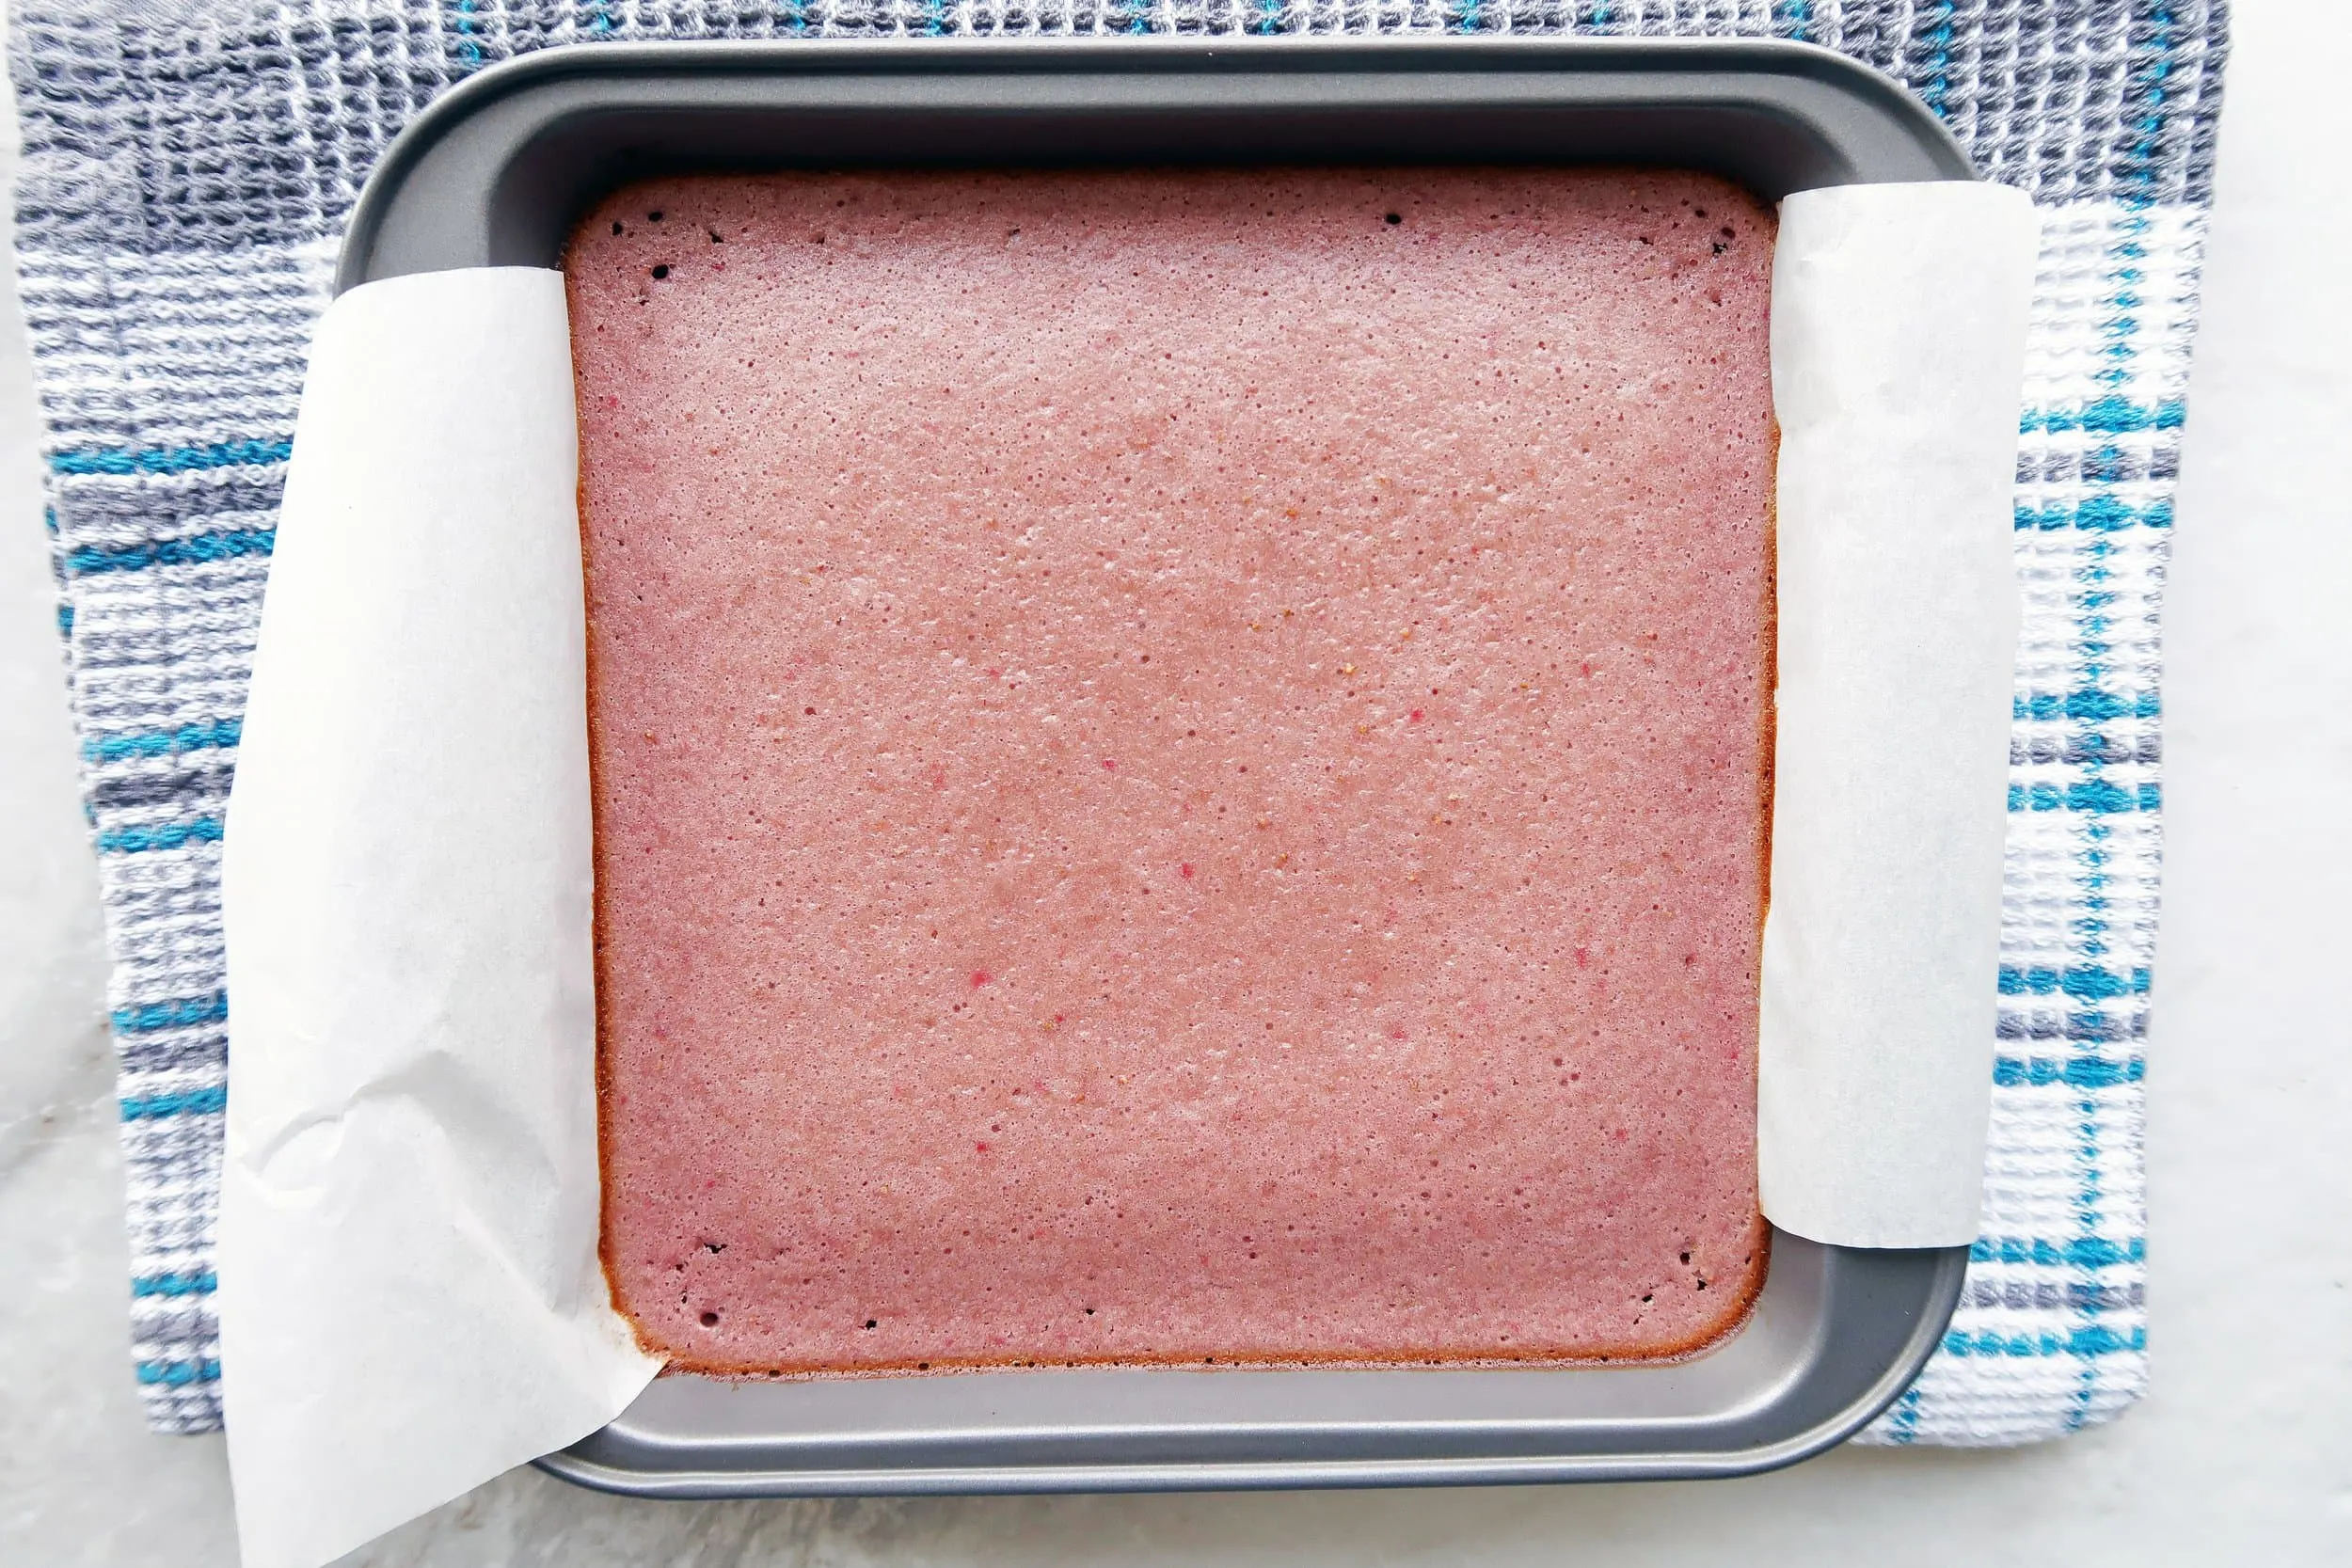 Soft and spongy strawberry layer baked on top of shortbread in a parchment-paper lined baking pan.